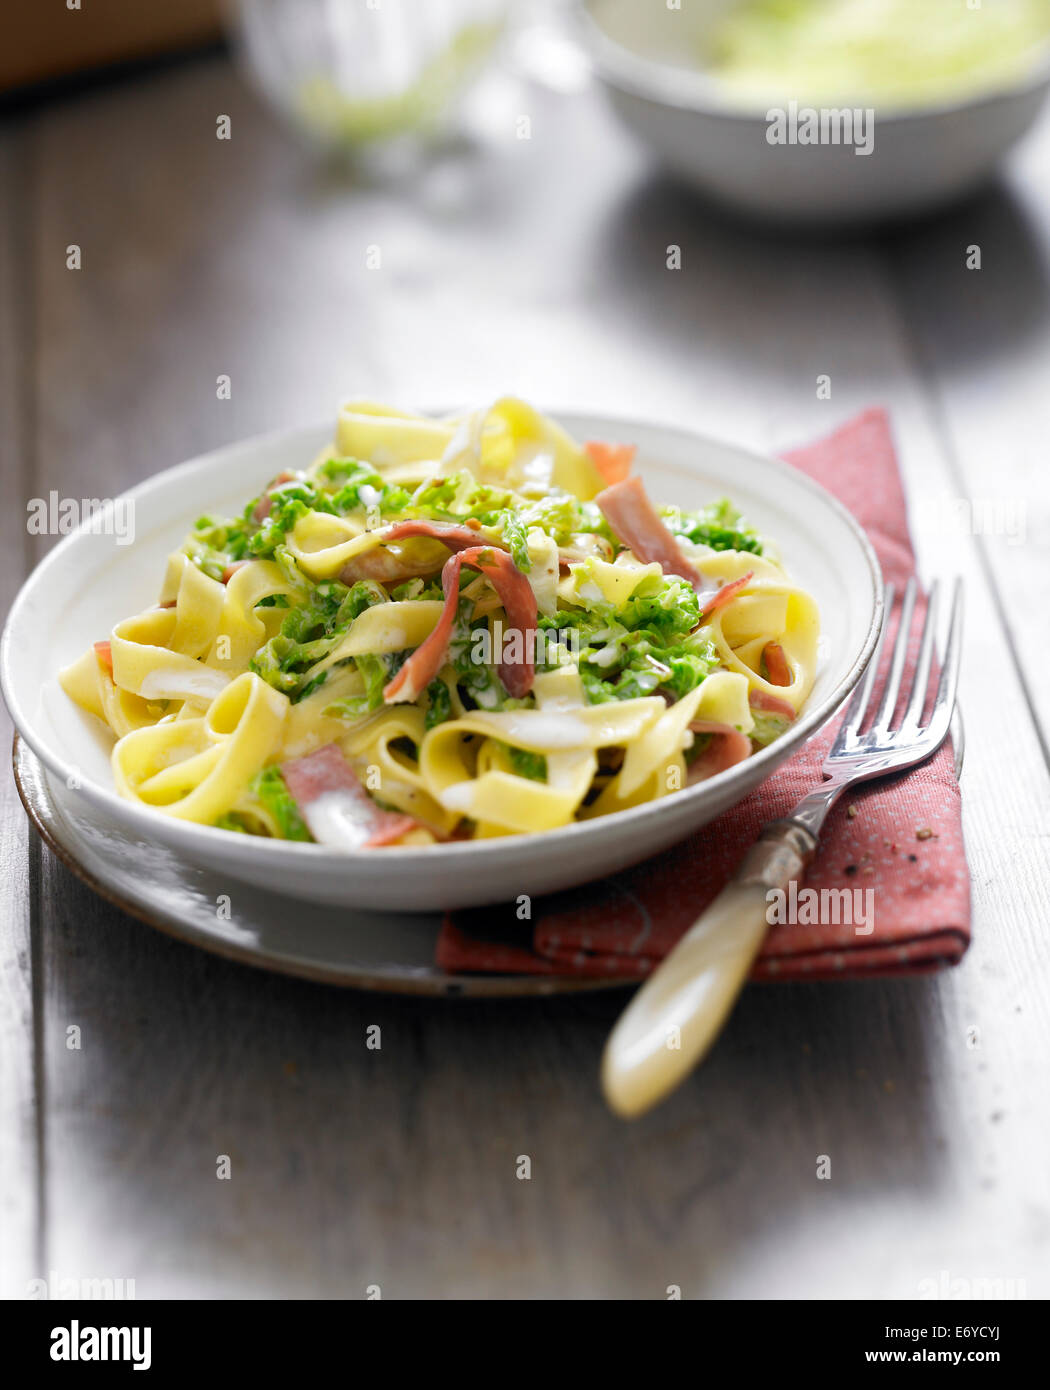 Tagliatelles with Parma ham and cabbages Stock Photo